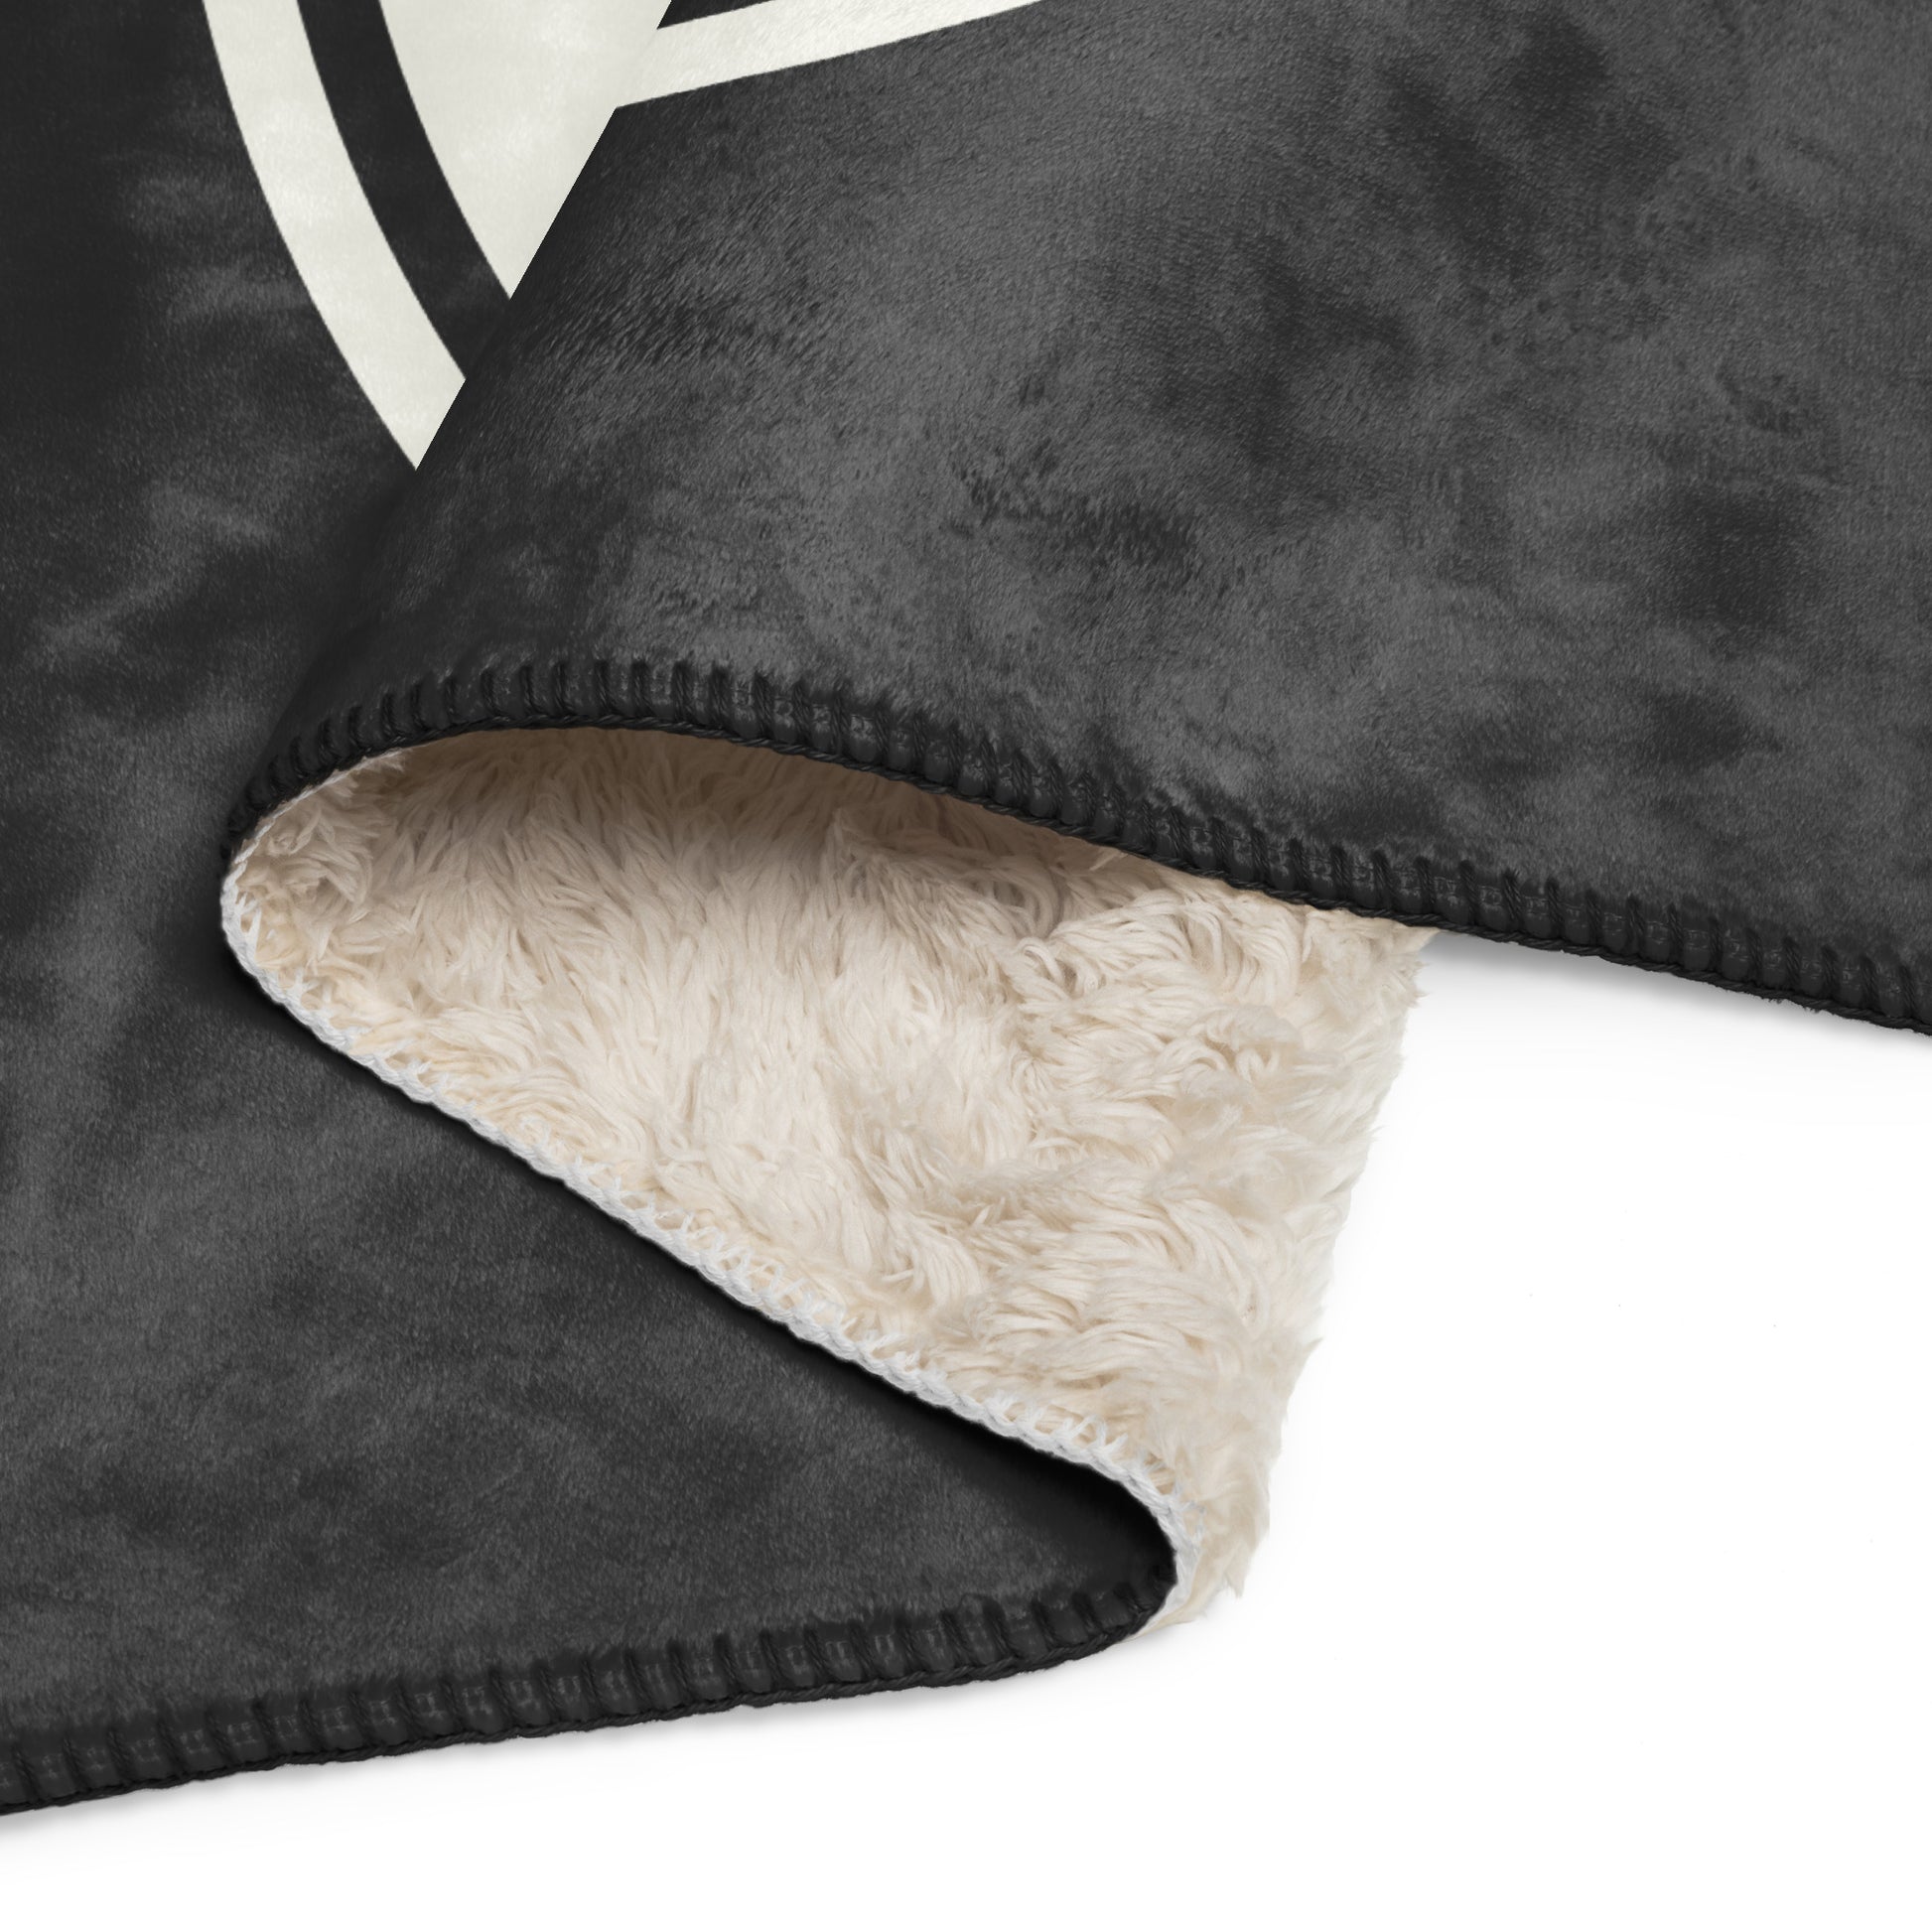 Unique Travel Gift Sherpa Blanket - White Oval • MAD Madrid • YHM Designs - Image 08